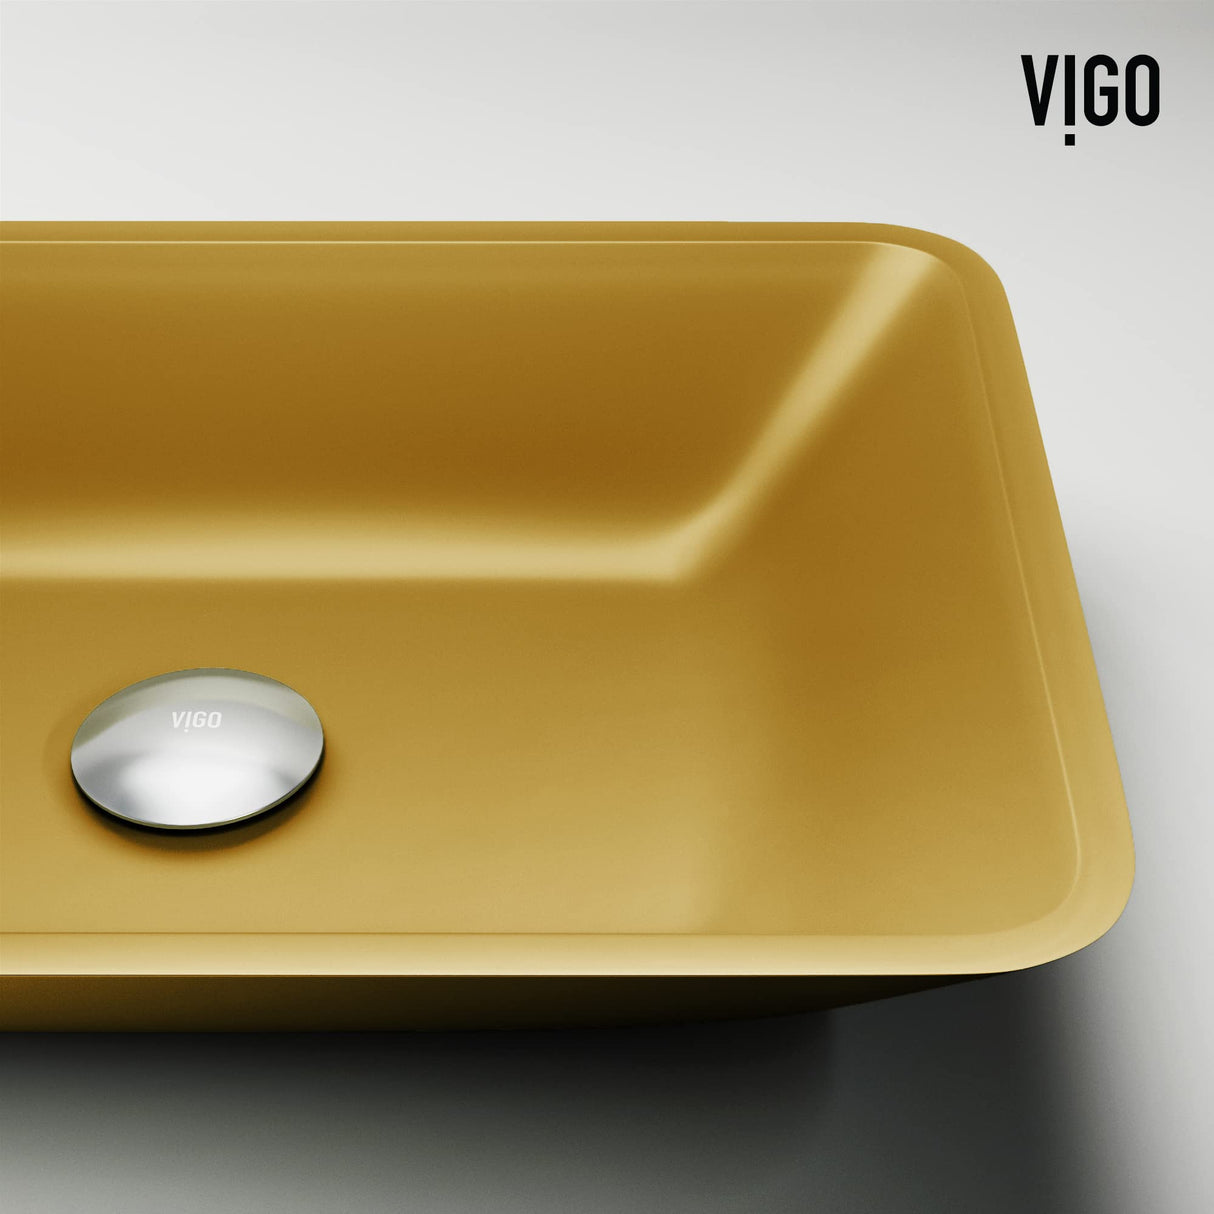 VIGO VGT2069 13.0" L -18.13" W -4.13" H Matte Shell Sottile Glass Rectangular Vessel Bathroom Sink in Gold with Norfolk Faucet and Pop-up Drain in Matte Gold